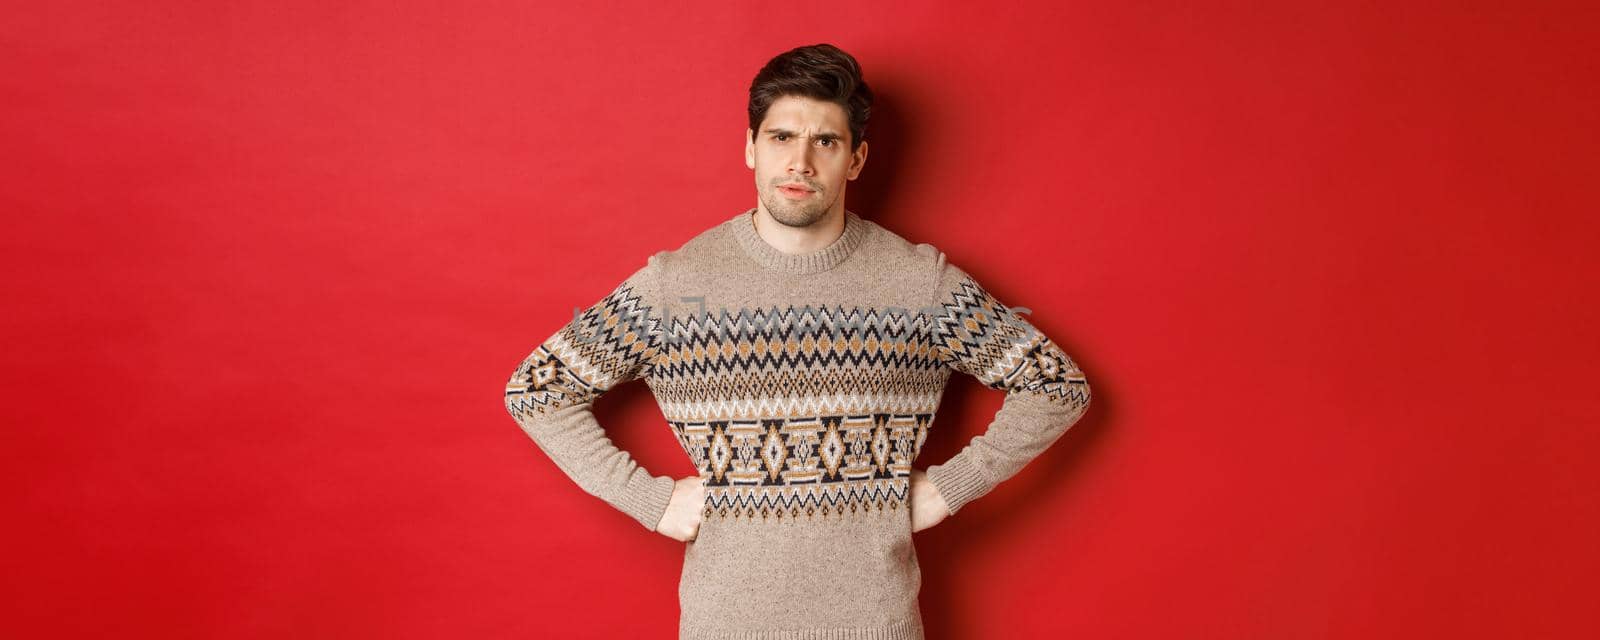 Portrait of doubtful and disappointed man, wearing christmas sweater, frowning and looking displeased at you, standing against red background.